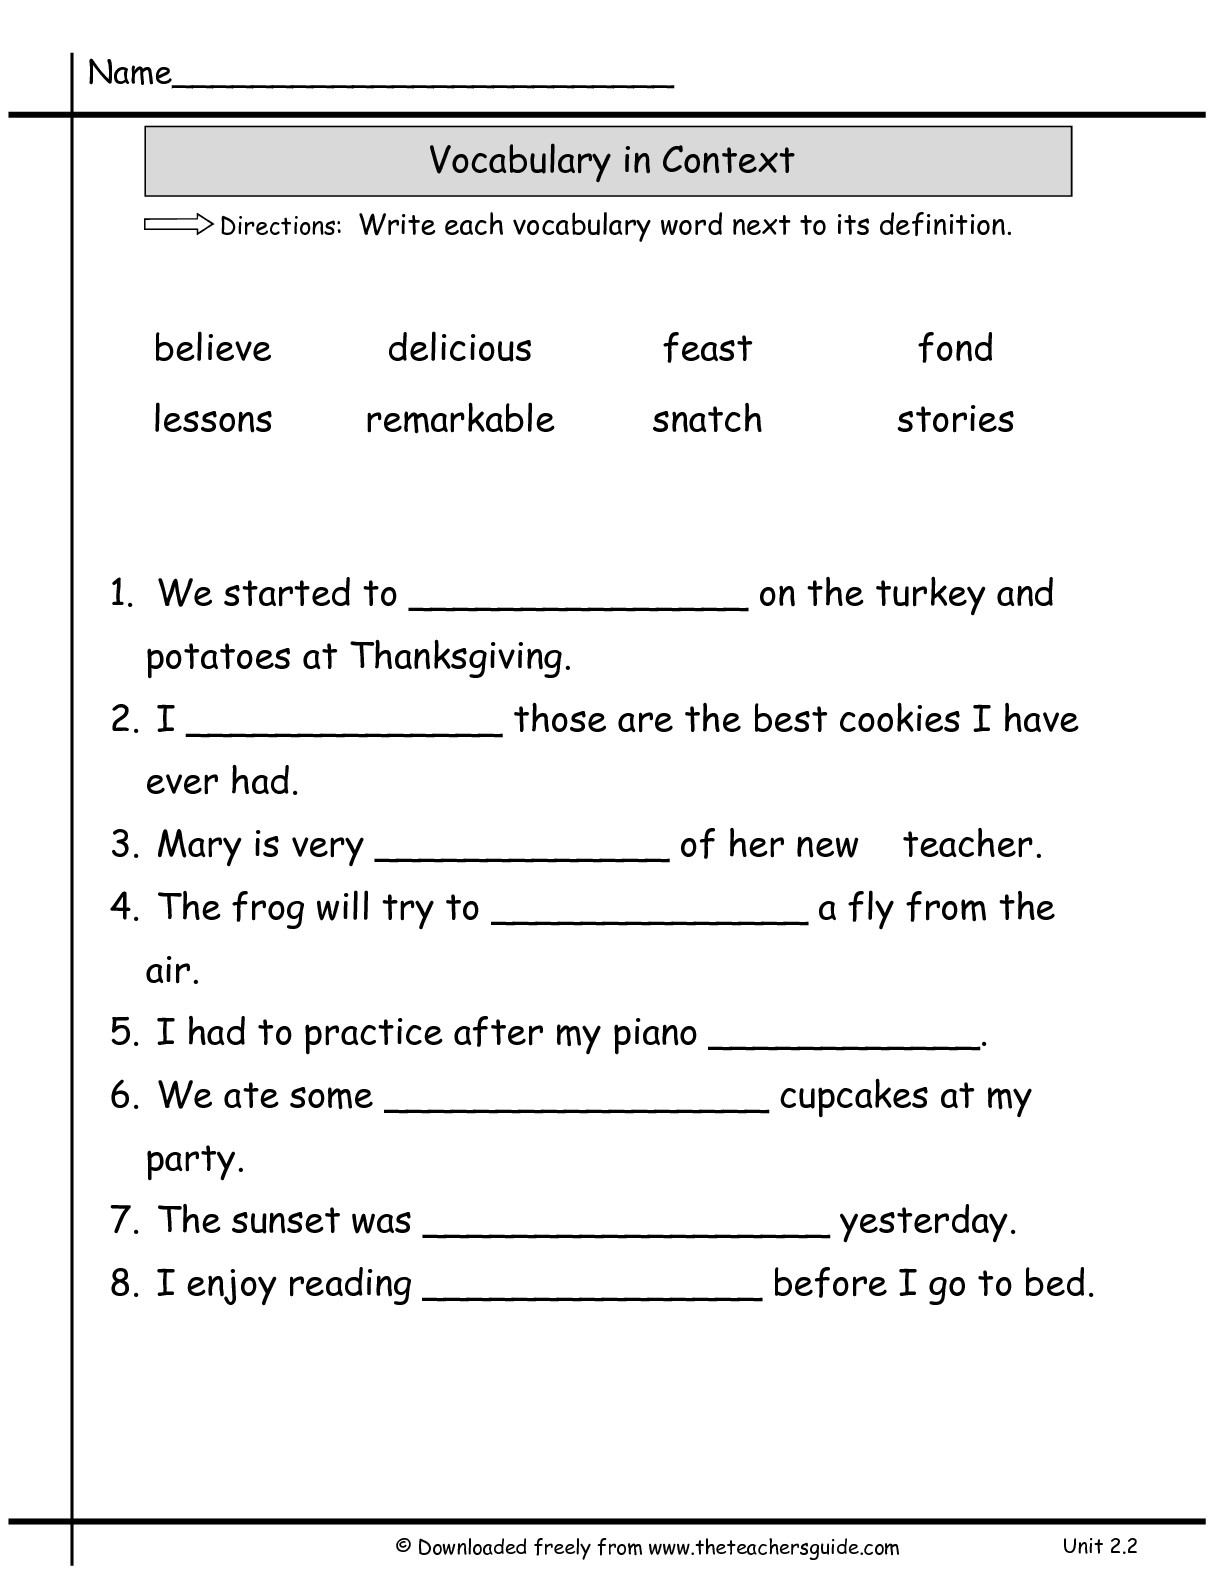 12-best-images-of-guessing-vocabulary-in-context-worksheets-guessing